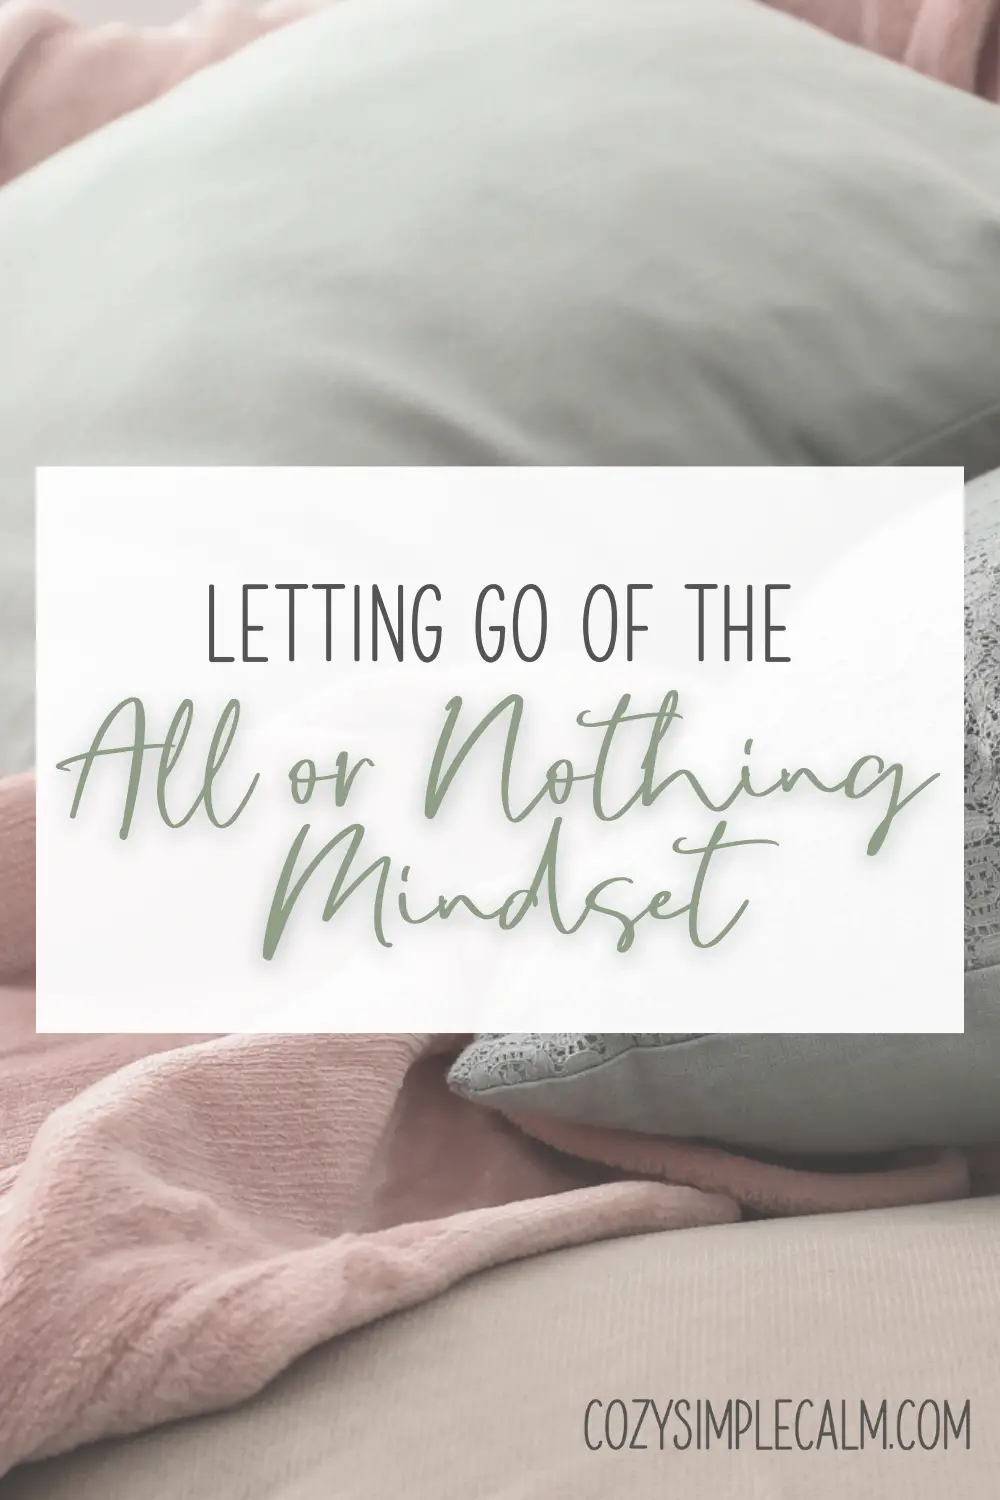 Image of blankets and pillows - Text overlay: Letting go of the all or nothing mindset - cozysimplecalm.com